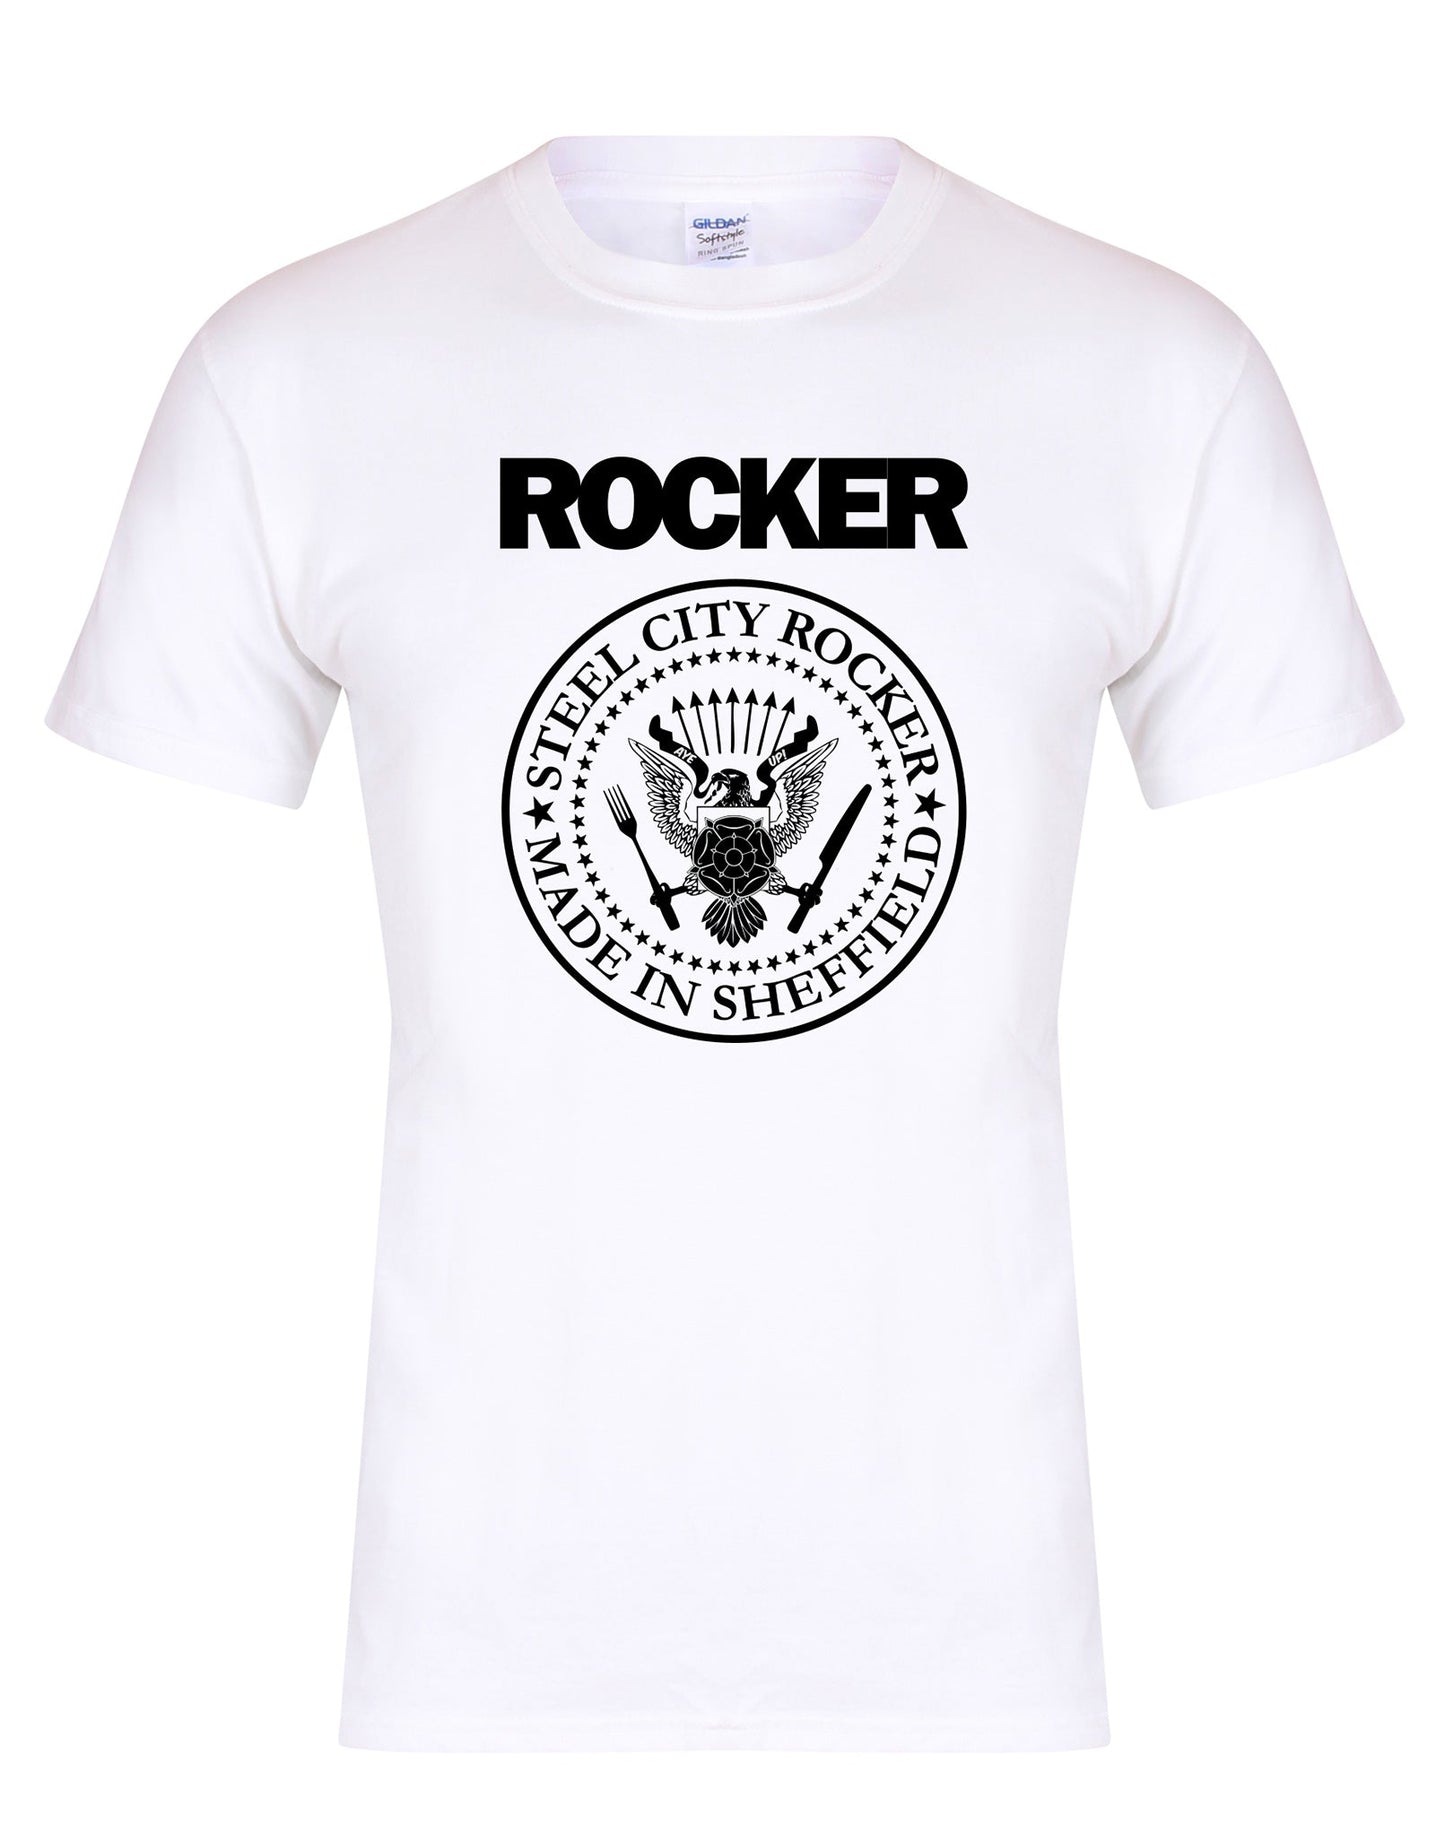 Steel City Rocker - Ramones design T-shirt - various colours - Dirty Stop Outs